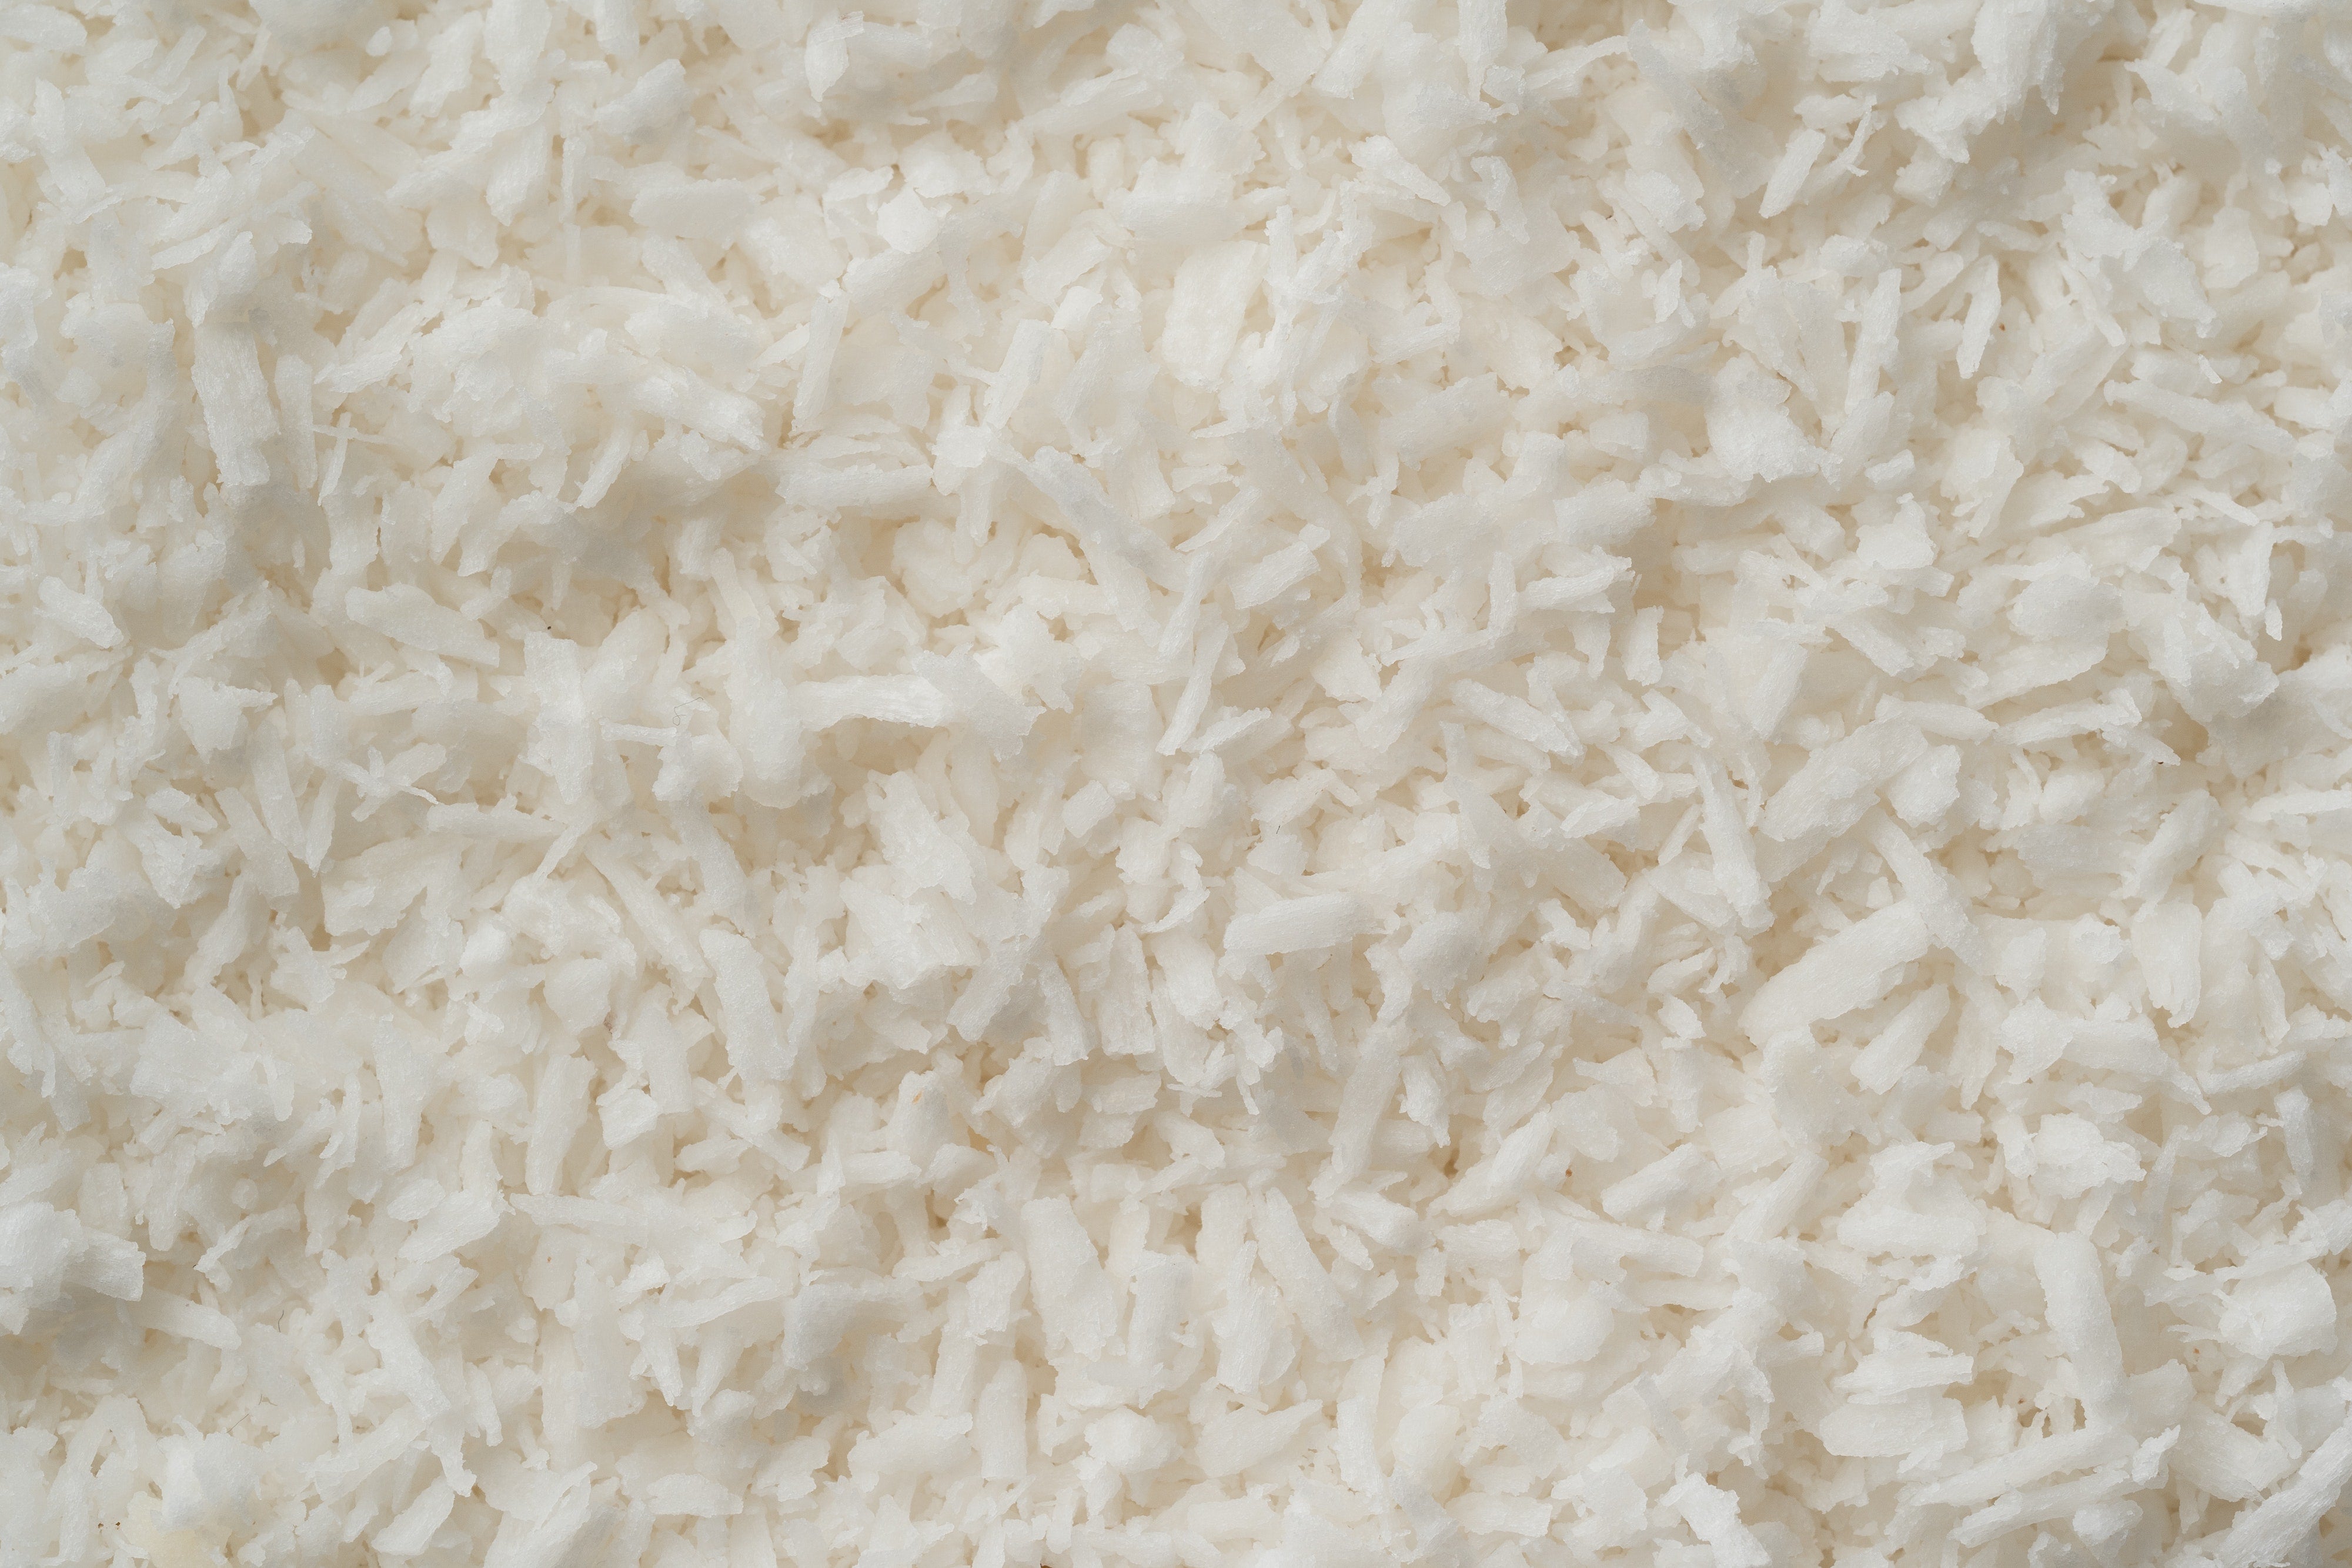 Coconut Flakes 200g